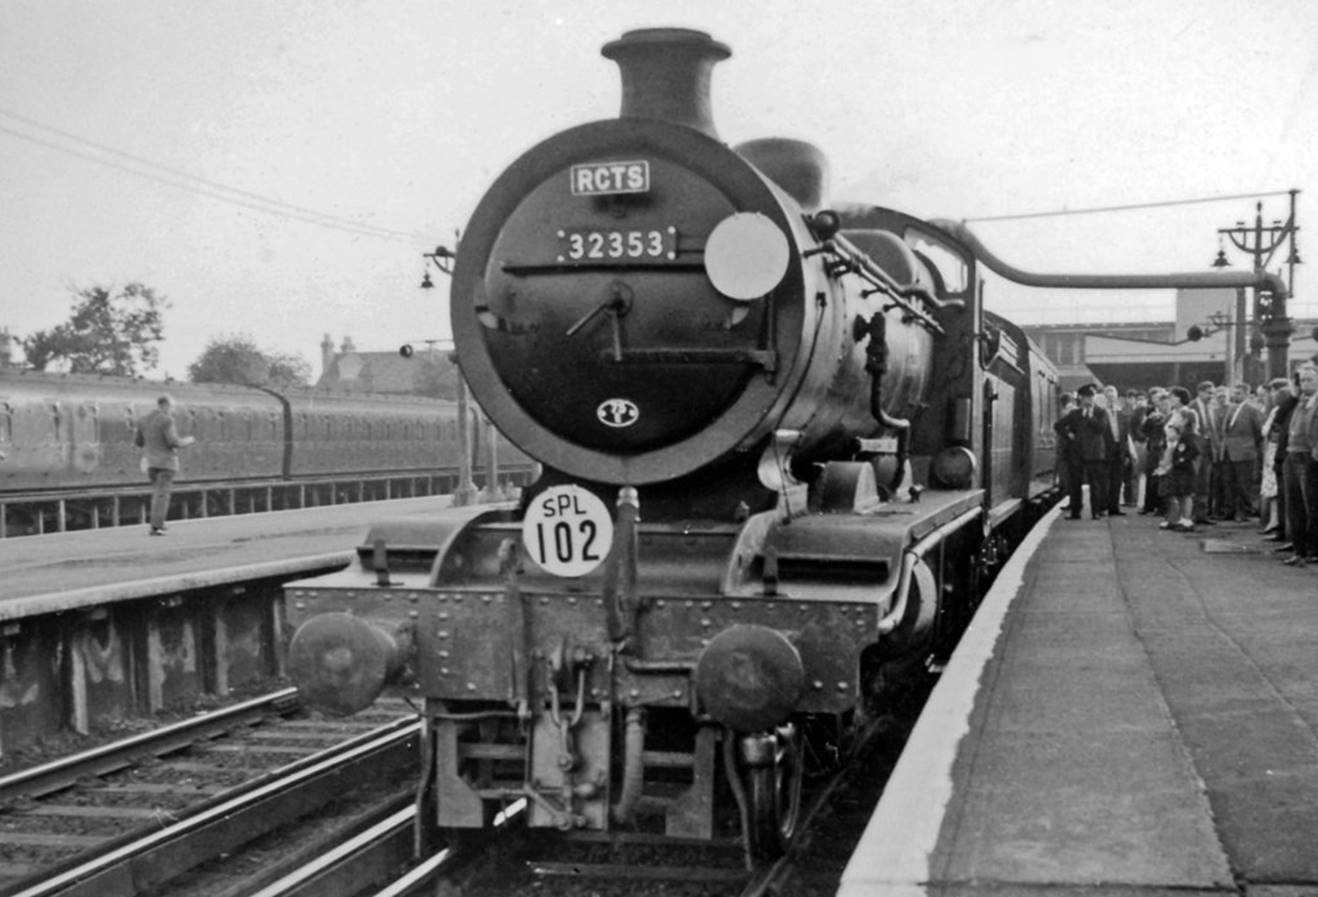 Stoneleigh
LCGB ‘Wealdsman’ Rail Tour
Even back on 13th June 1965 this was an extremely rare occurrence on that Waterloo - Raynes Park - Epsom line, as steam locomotives had practically never come that way since electrification over 40 years before. Stoneleigh station was 'modern', being opened 17th July 1932. 
Going towards Epsom on the LCGB ‘Wealdsman’ Rail Tour is rebuilt 'Battle of Britain' no. 34050 'Royal Observer Corps' (built as No. 21C150 in December 1946, rebuilt August 1958, withdrawn August 1965 and scrapped) on the first leg from Waterloo to Three Bridges via Horsham. From there the tour continued to Hastings via East Grinstead, Eridge & Hailsham. It returned via Eastbourne, Haywards Heath, Hove, Steyning, Horsham, Cranleigh, Guildford, Effingham Junction & Wimbledon.
© Ben Brooksbank (CC-by-SA/2.0)
